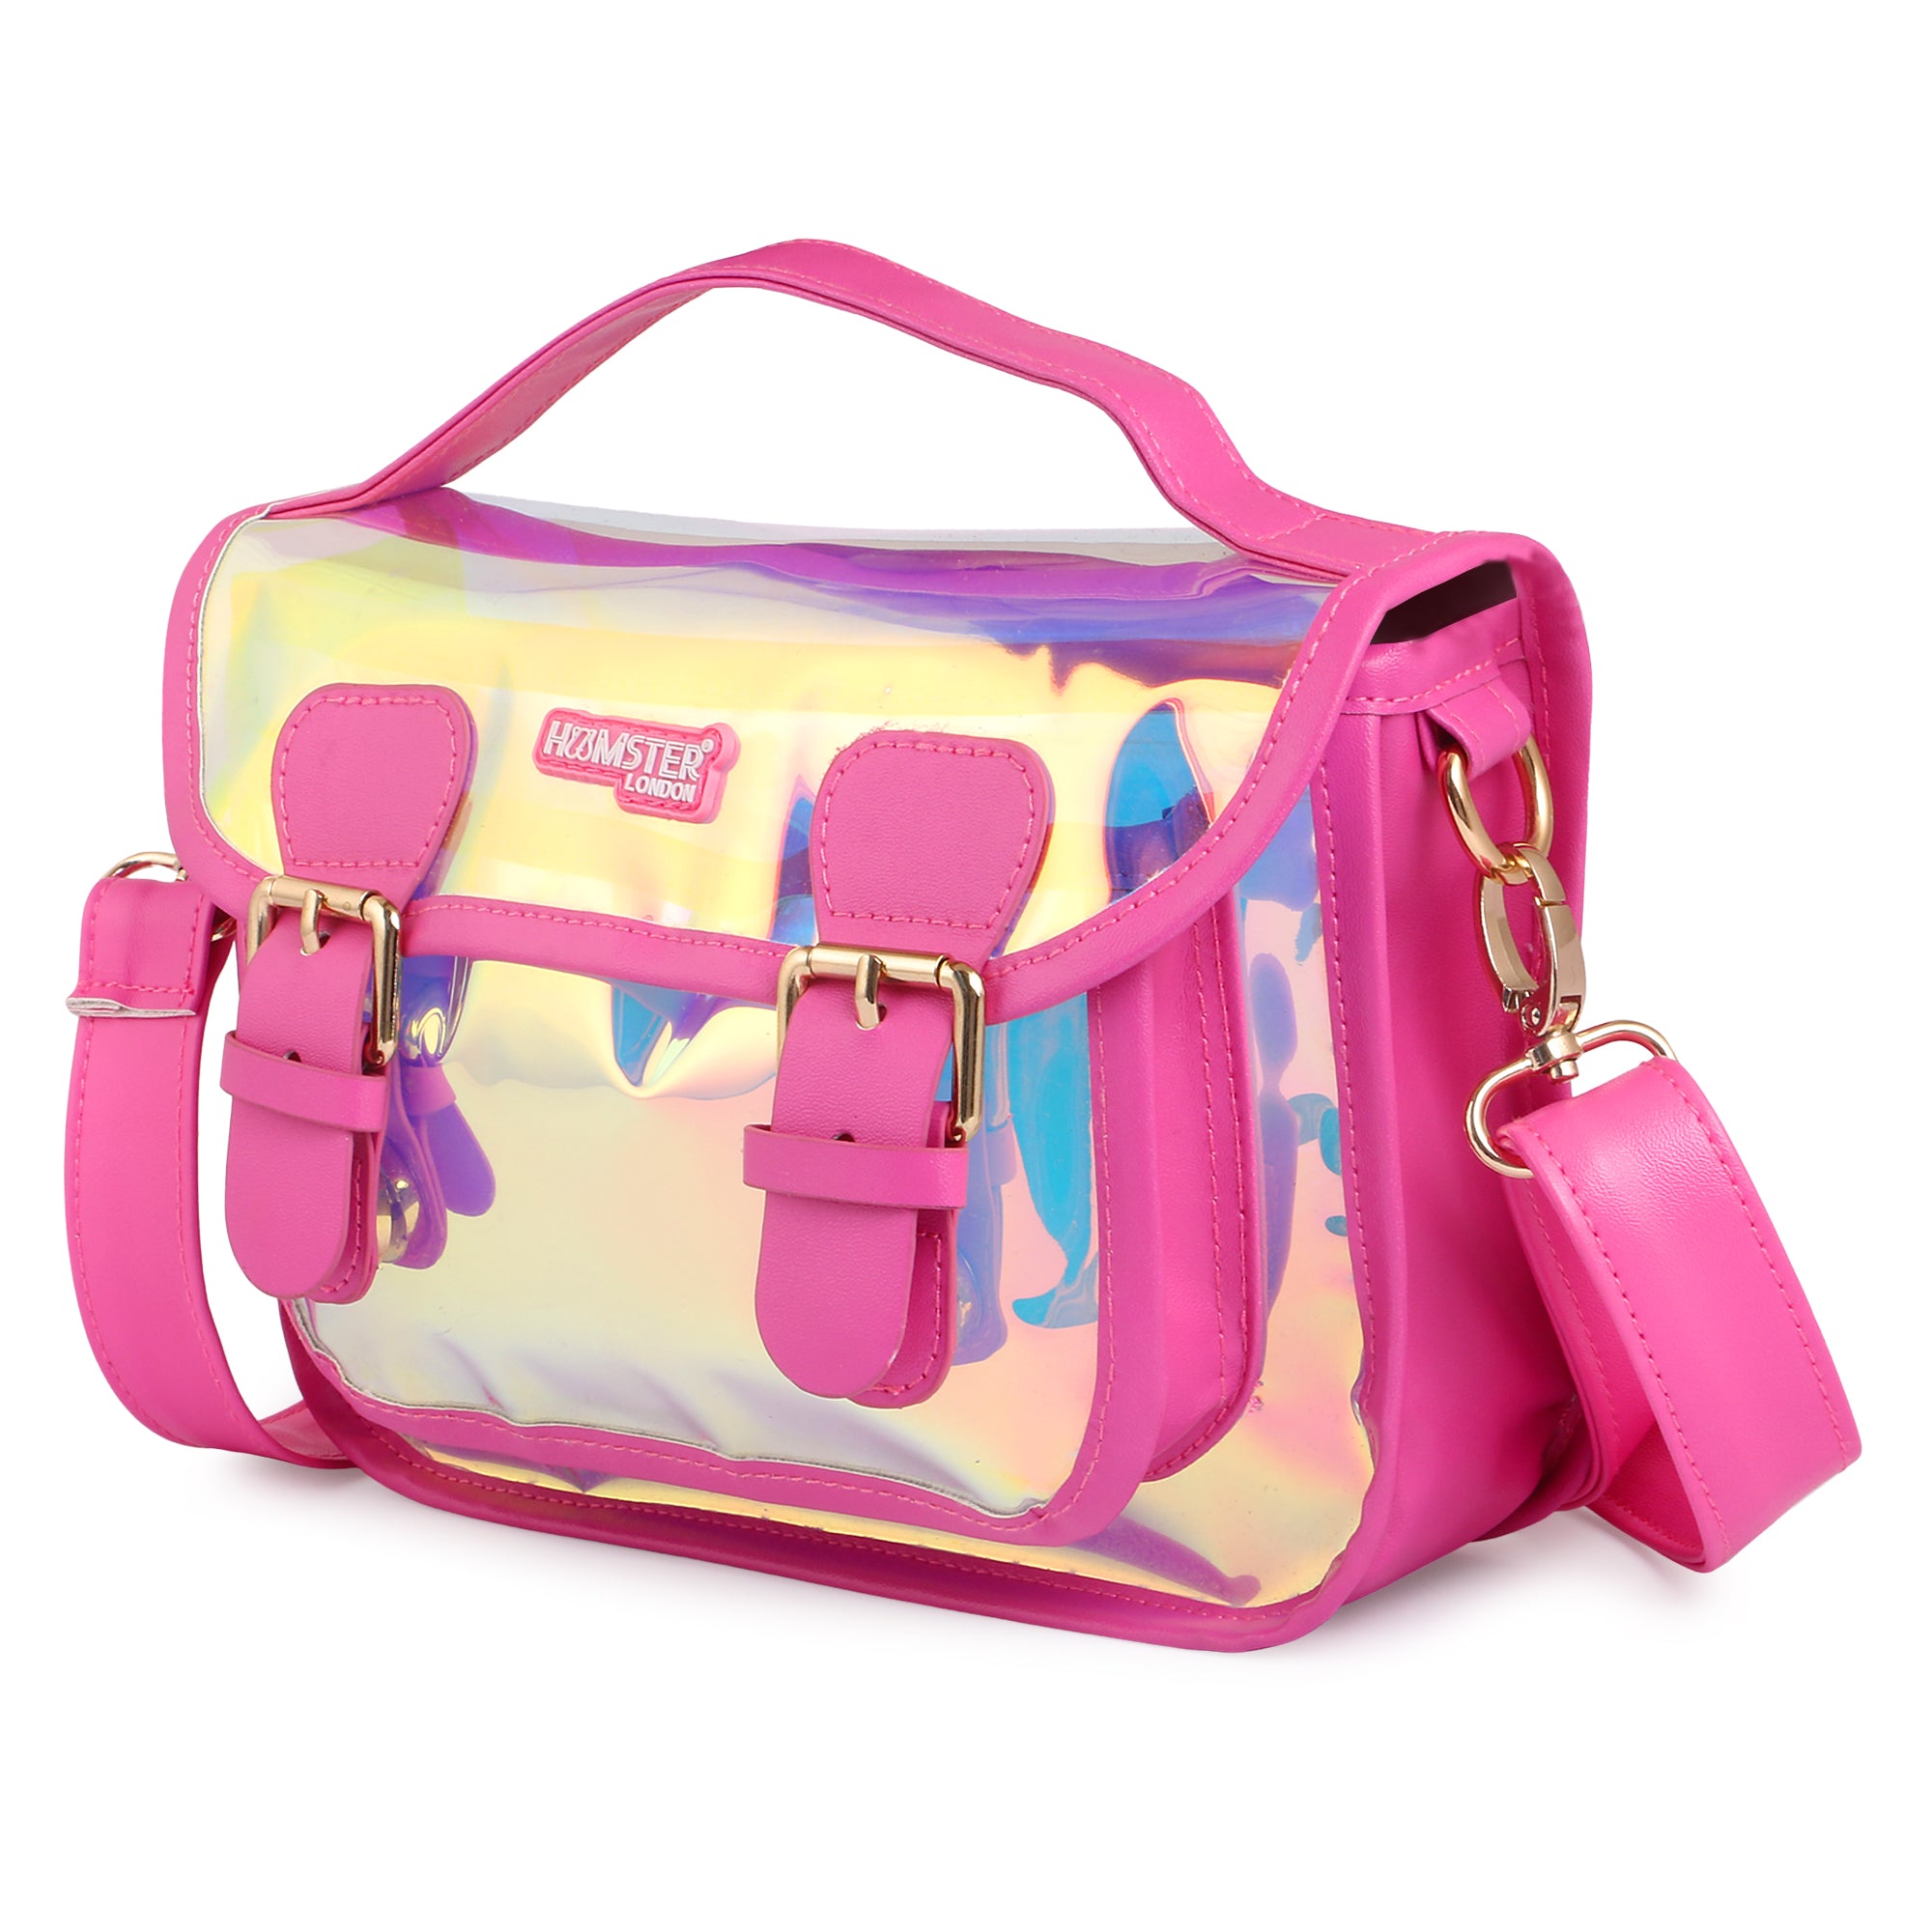 HL Classic Tote Bag Pink With Sling bag